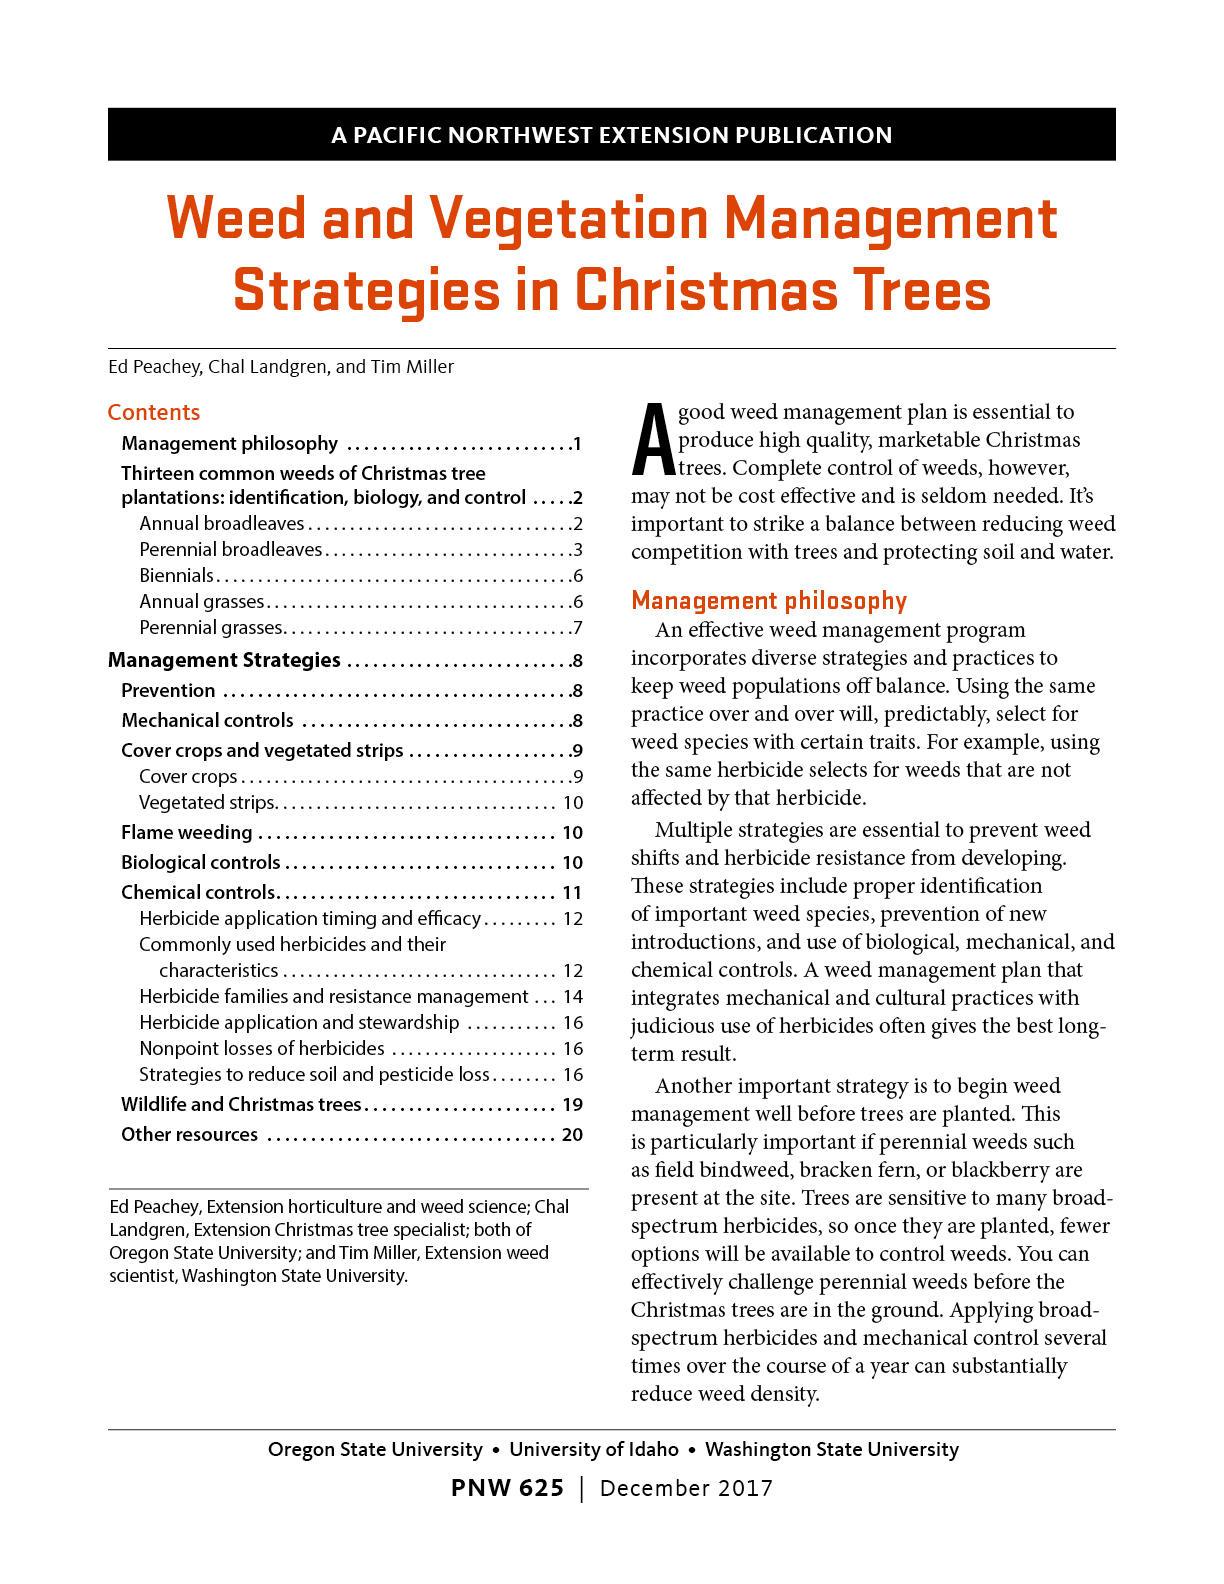 Cover image of Weed and Vegetation Management Strategies in Christmas Trees publication